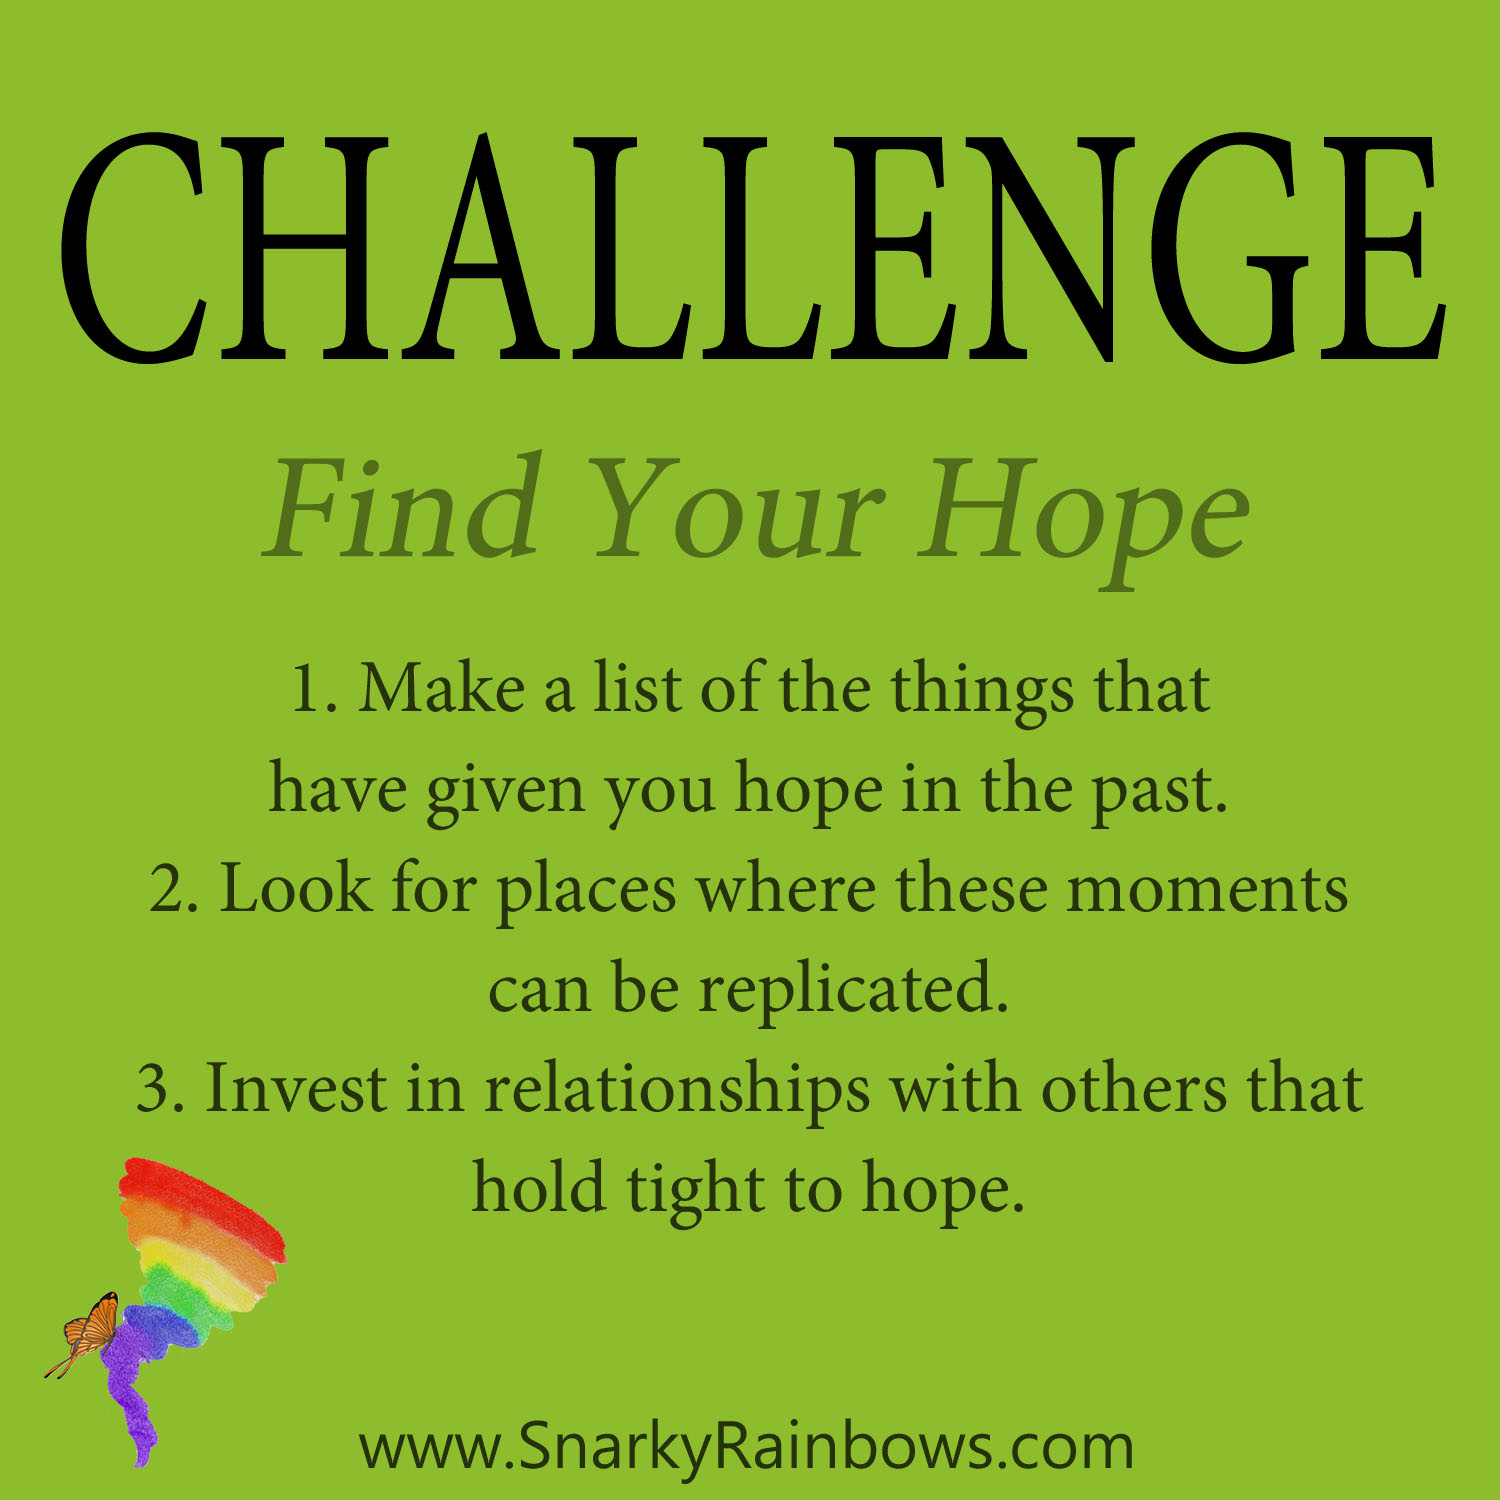 Daily Challenge for December 6, 2019 - find your hope